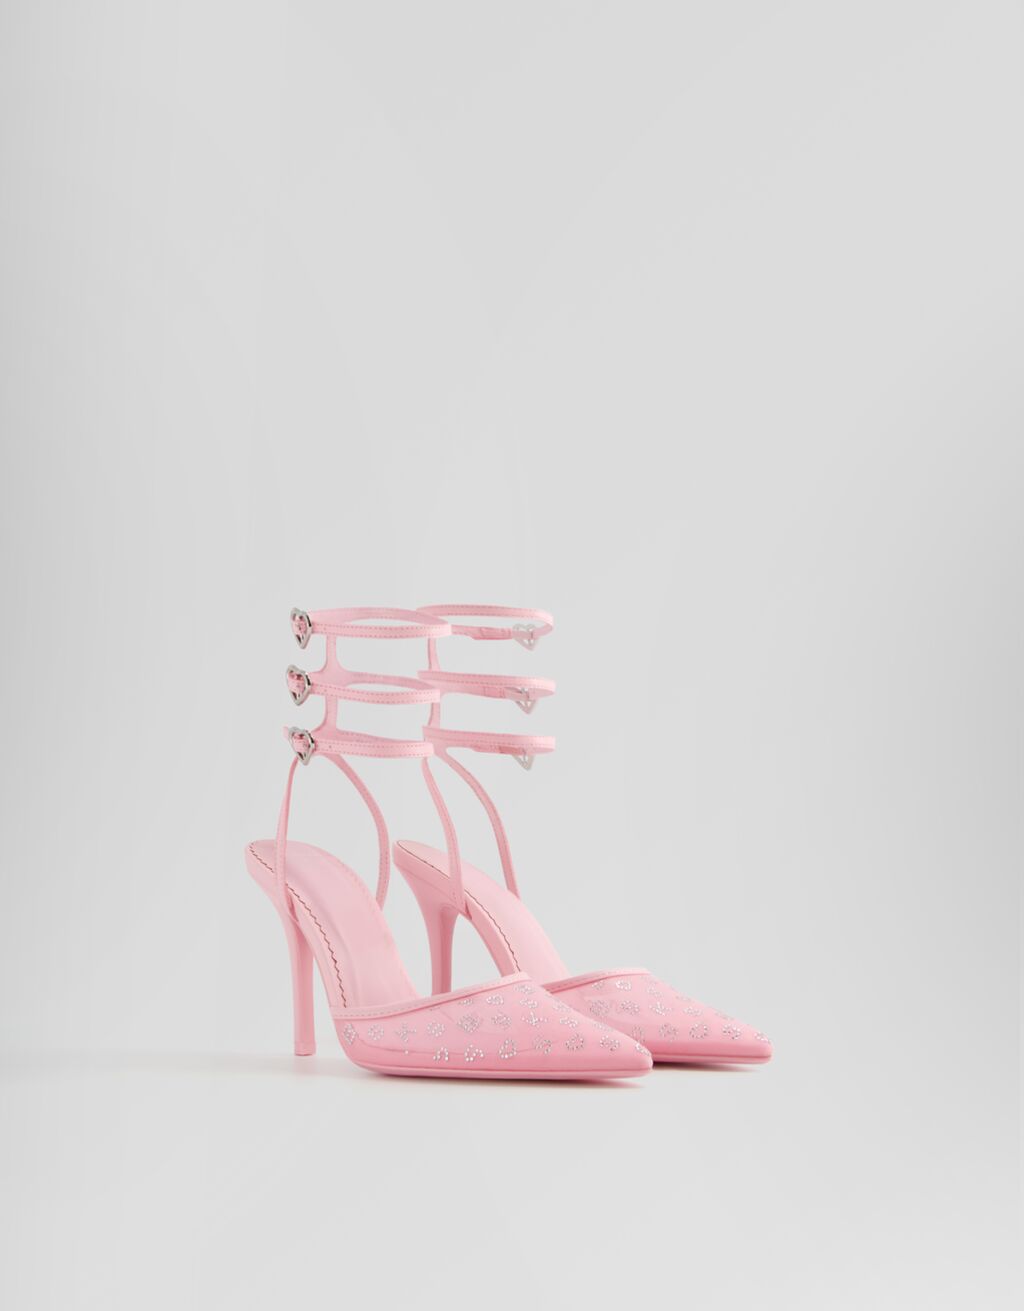 Shiny high-heel shoes with ankle straps and heart-shaped buckles.-Pink-0